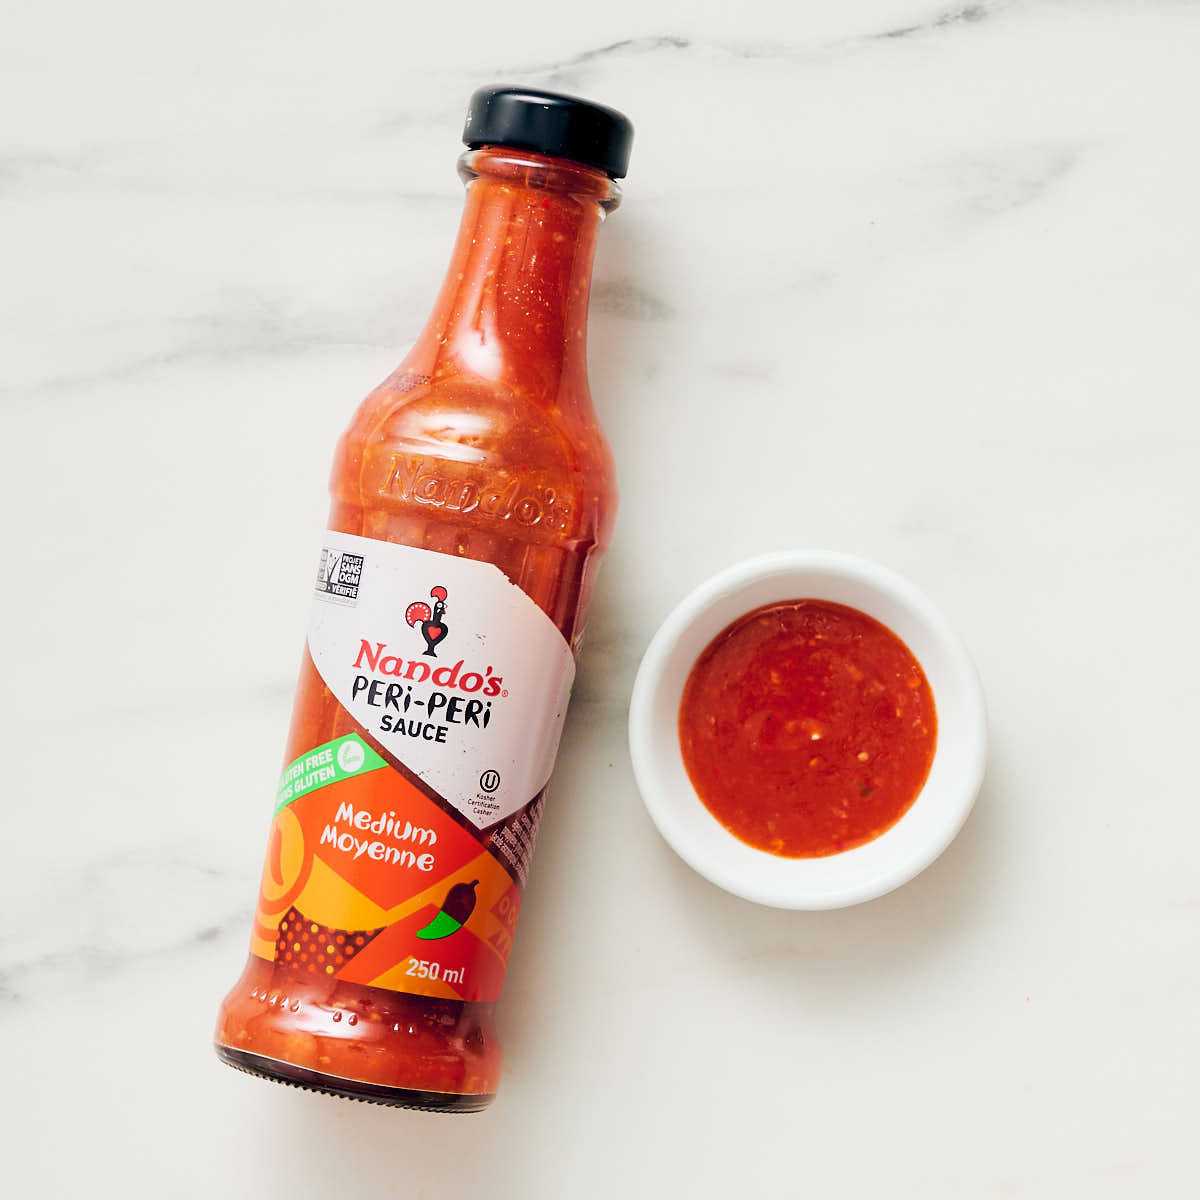 Nando's Peri Peri Sauce in a bottle and hot sauce in a small bowl.